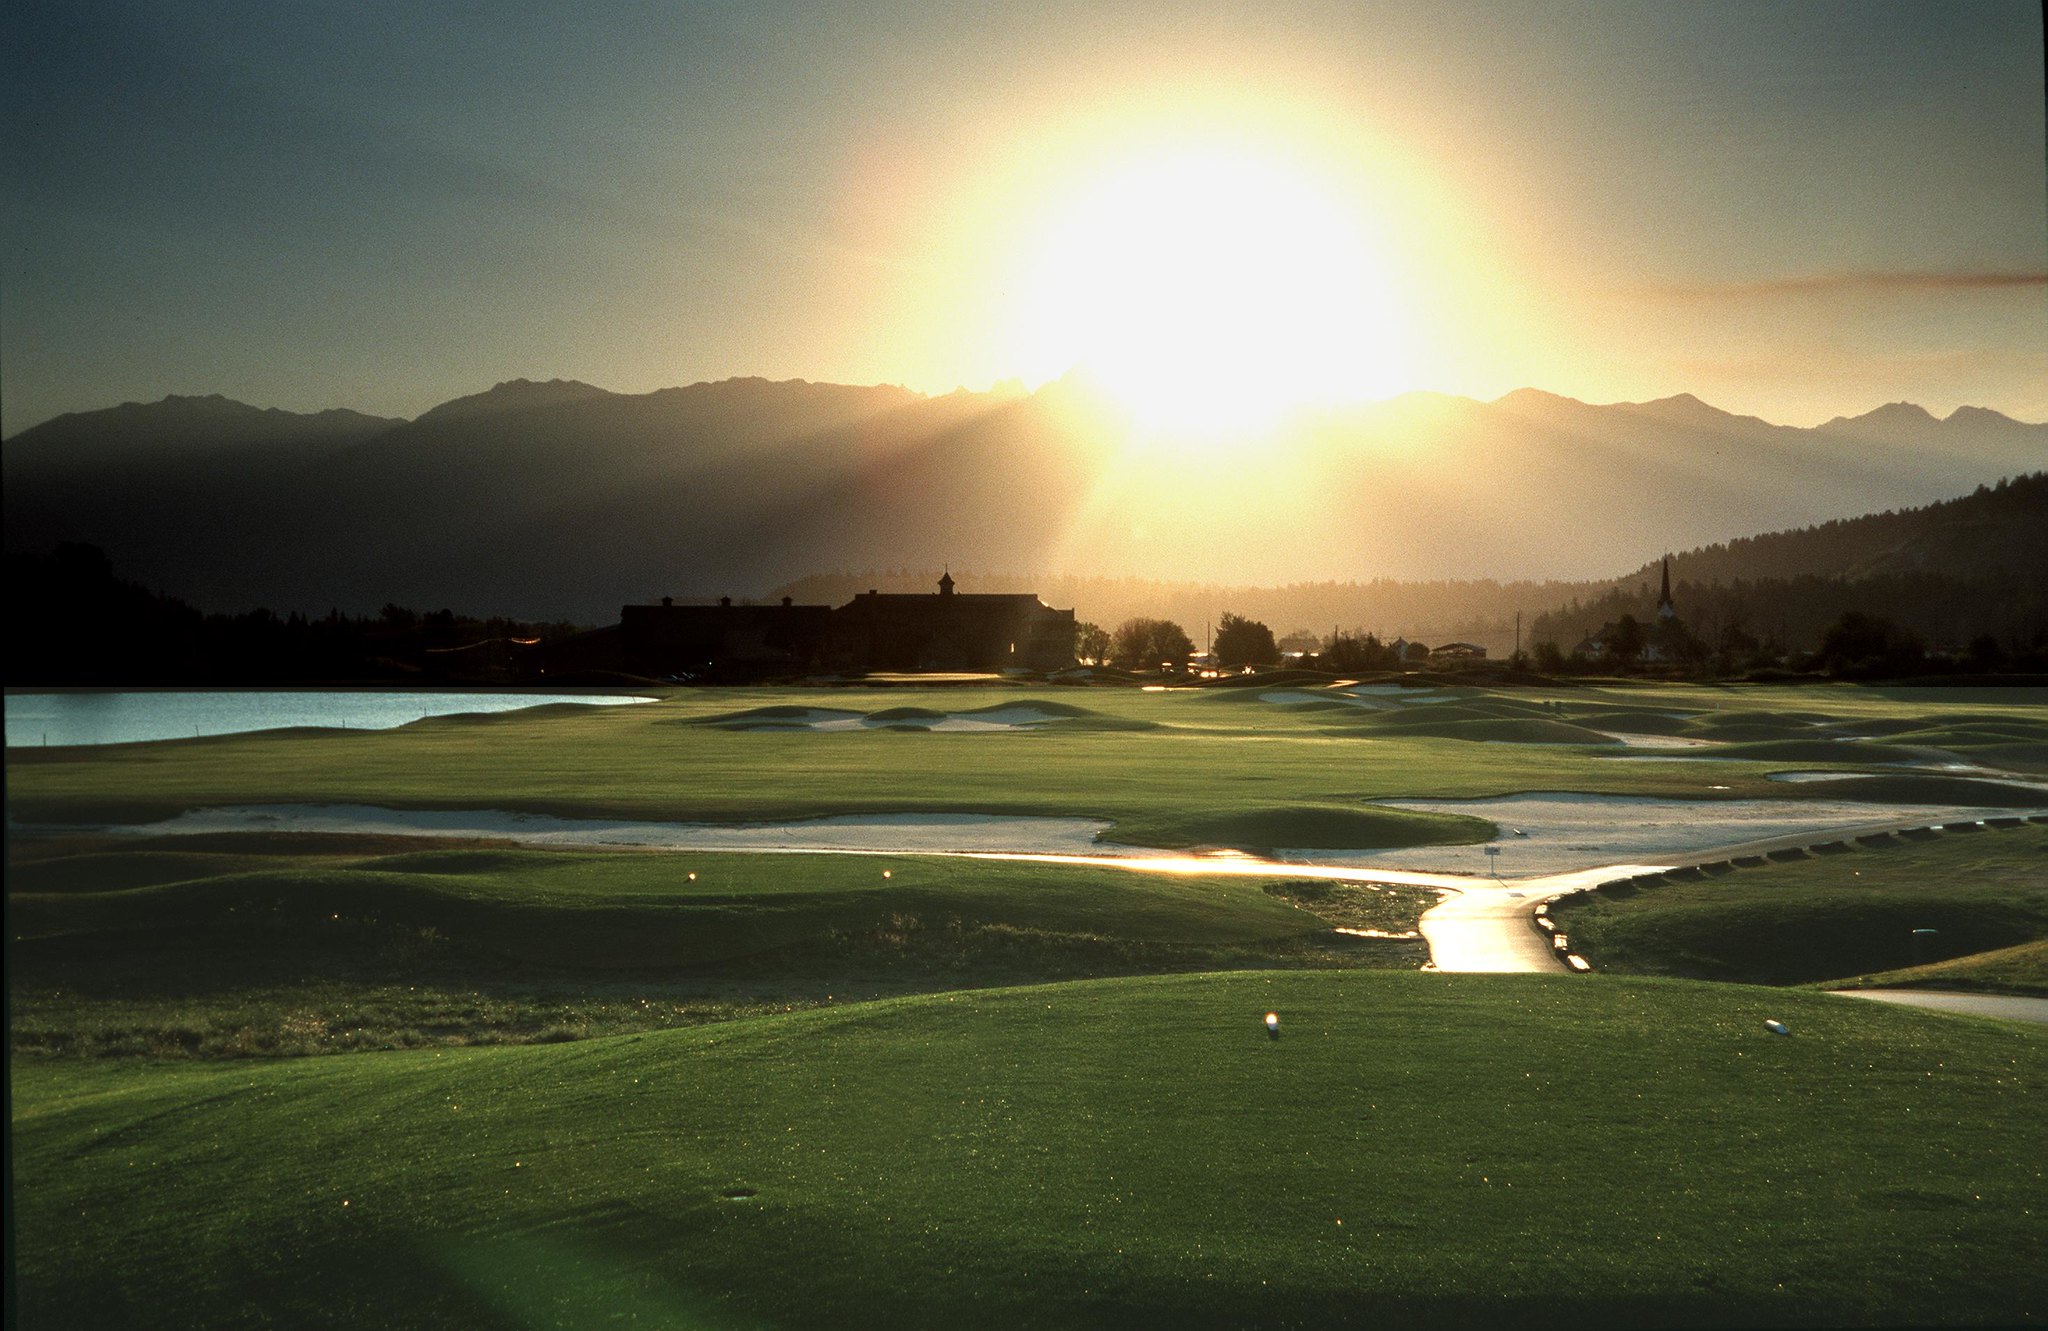 A brilliant sun rises over mountains and shines on a green golf course by the water.